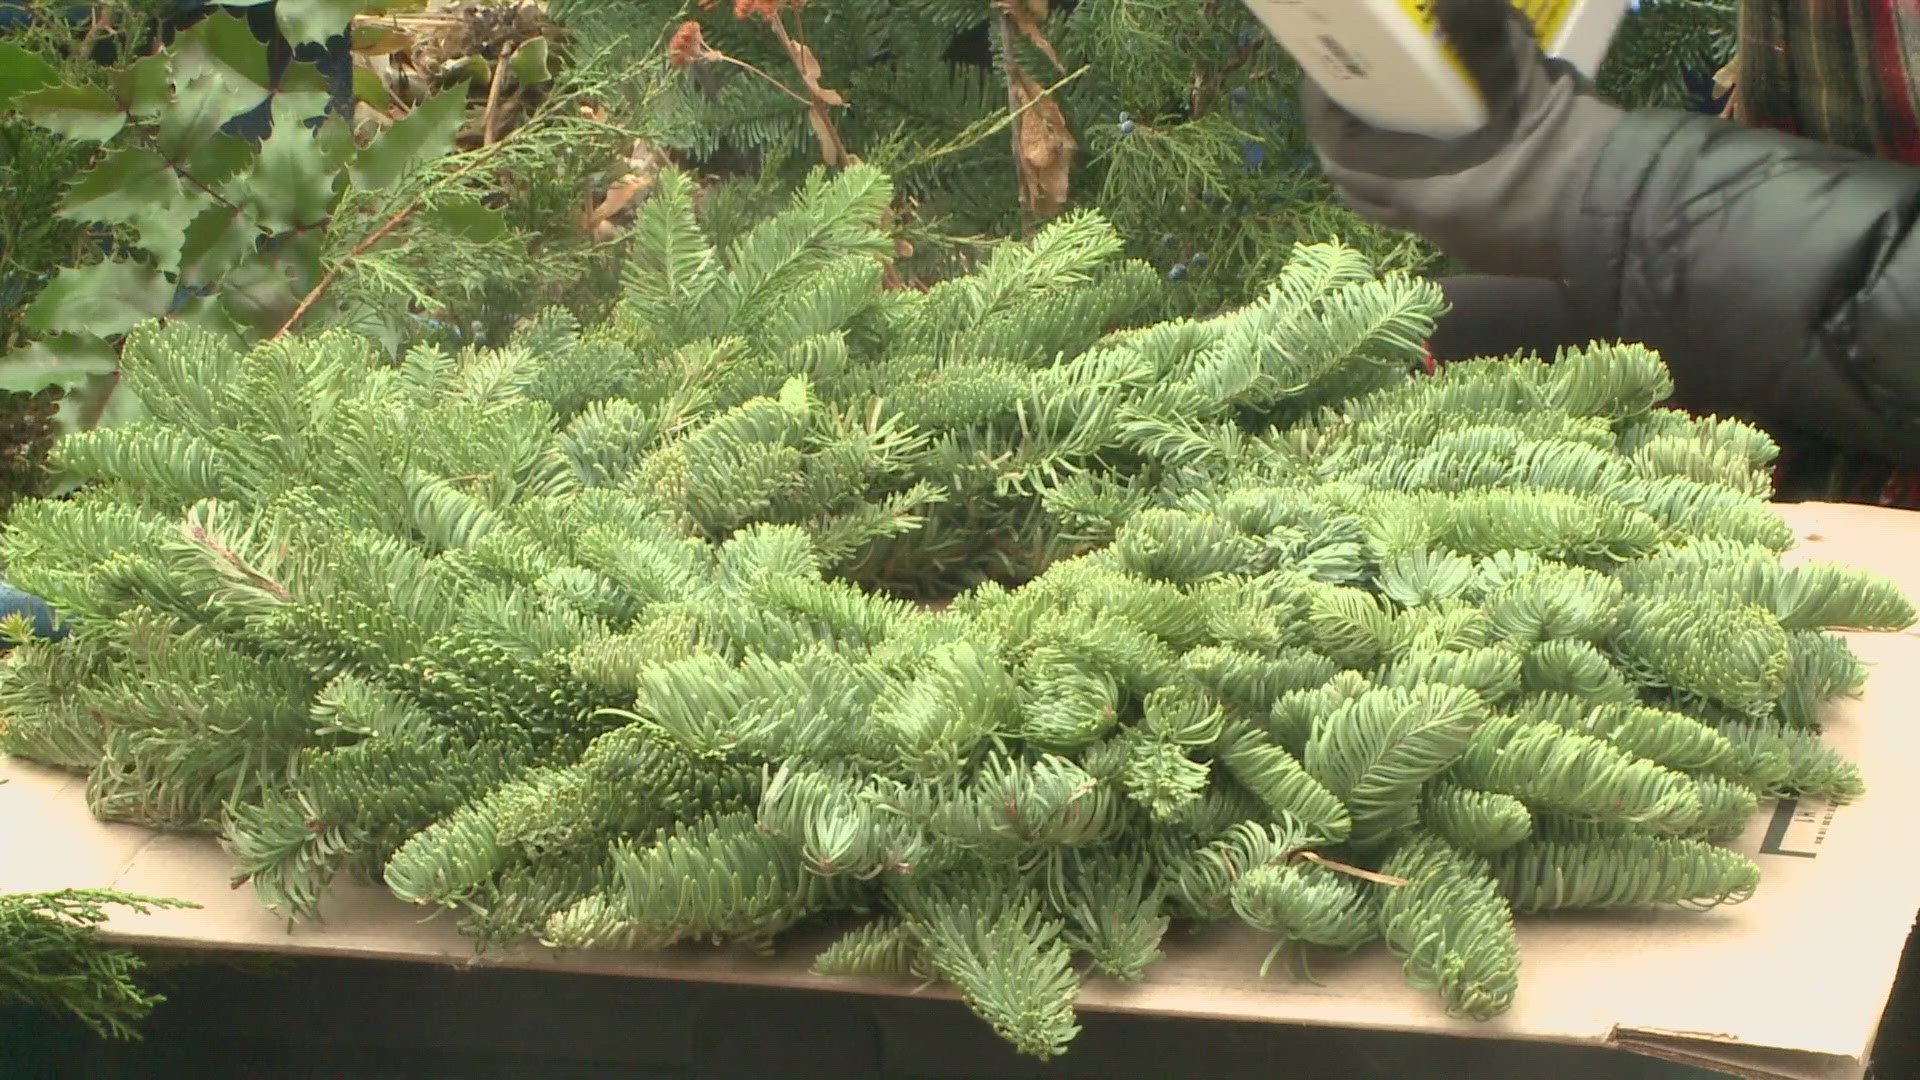 9NEWS Garden Expert Rob Proctor has some tips on how to keep needles from dropping off your Christmas trees and evergreens.